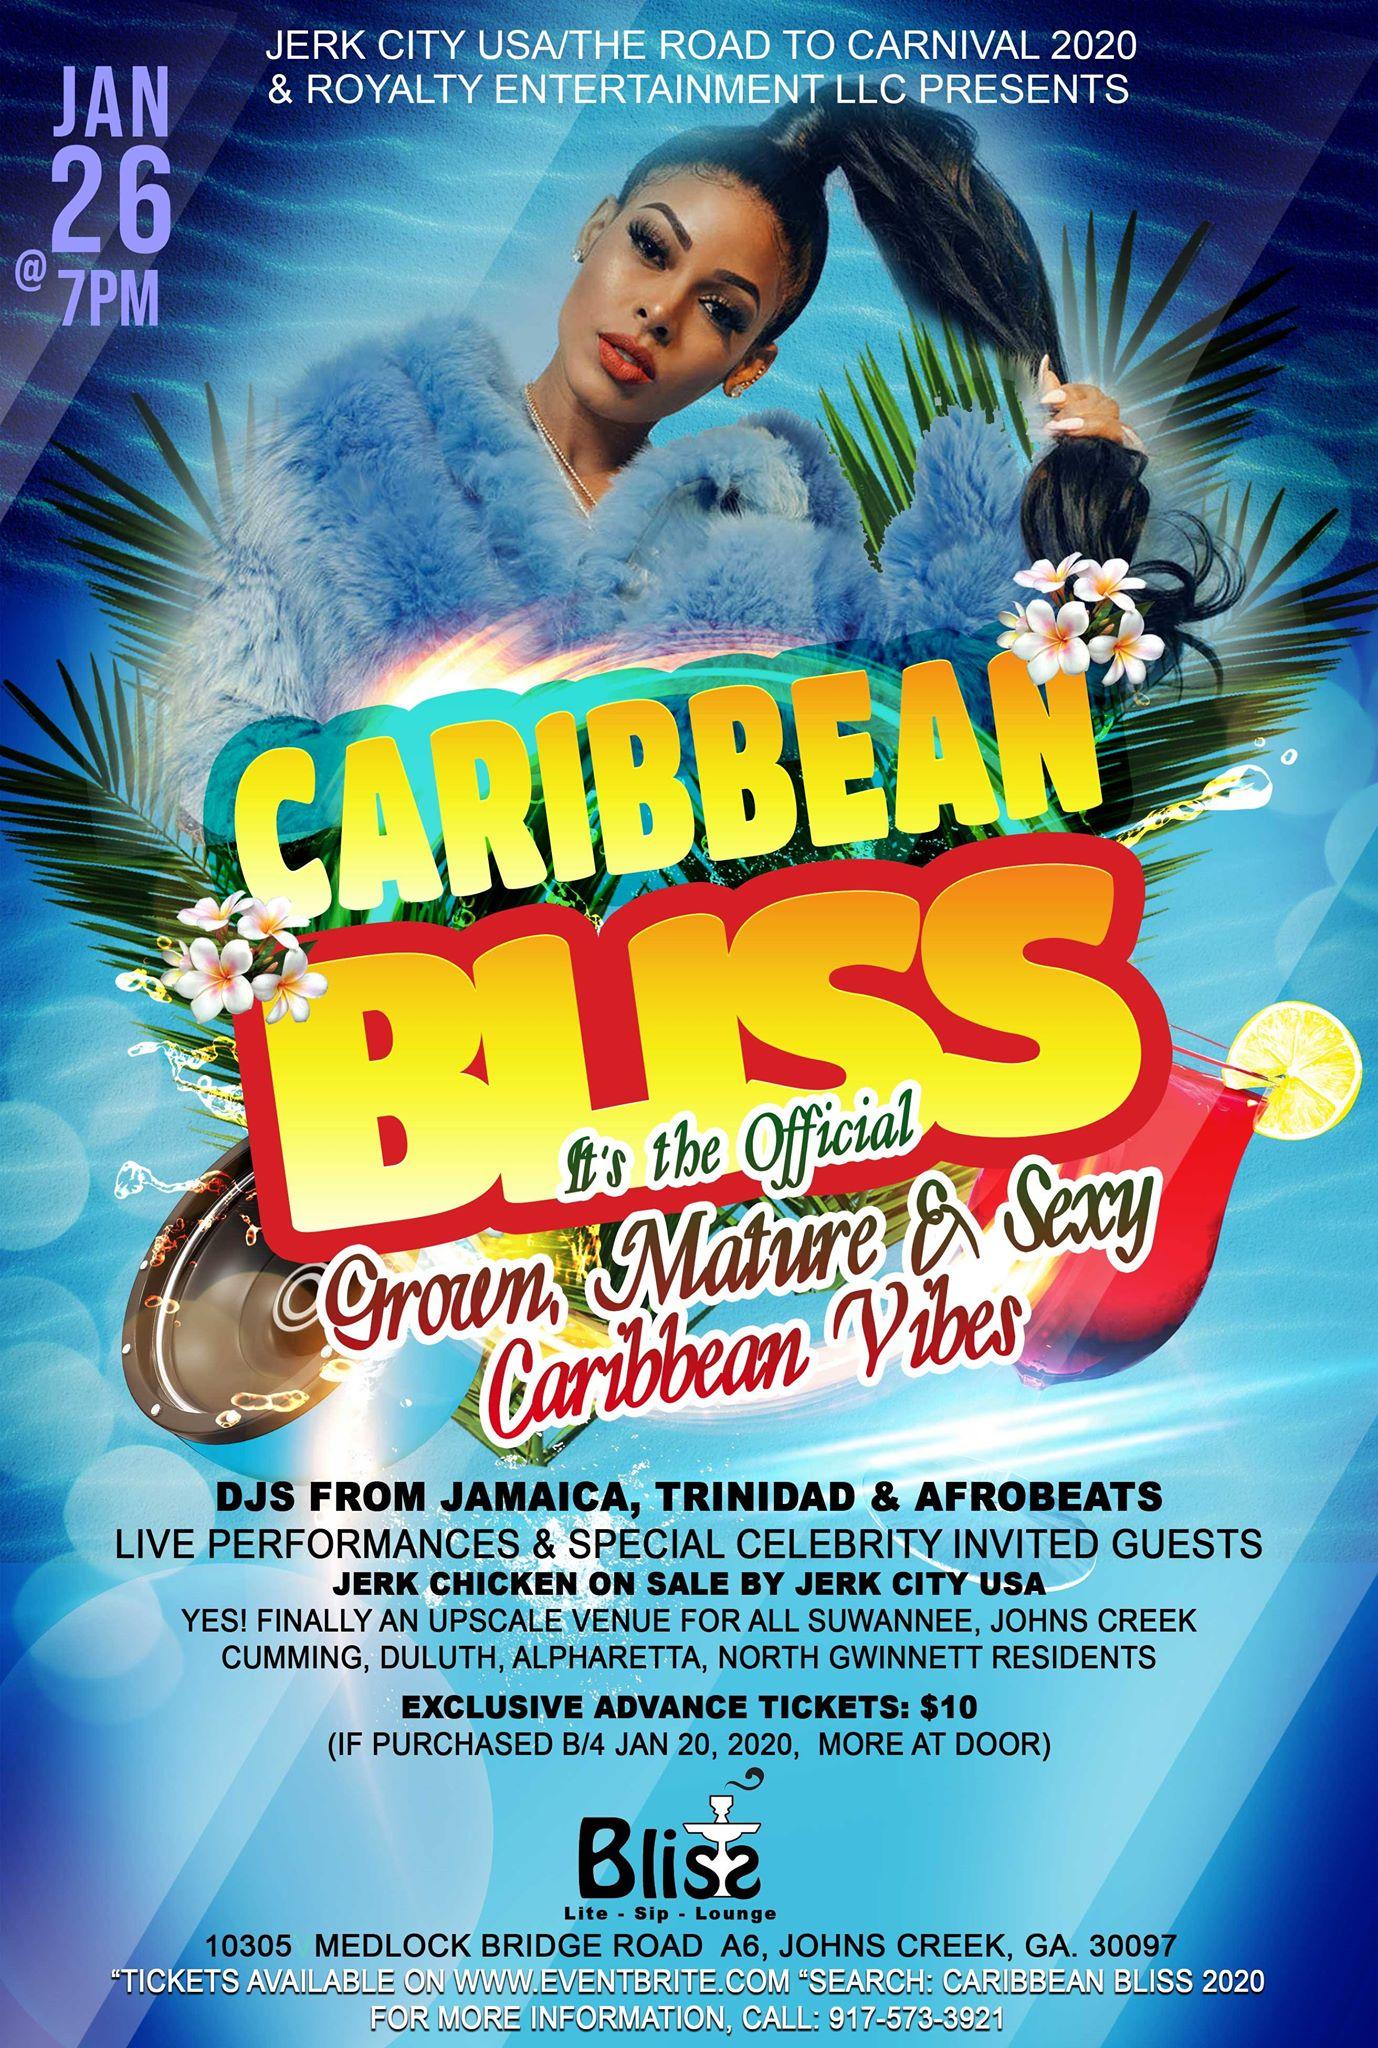 Garvin Caribbean Vibes Party